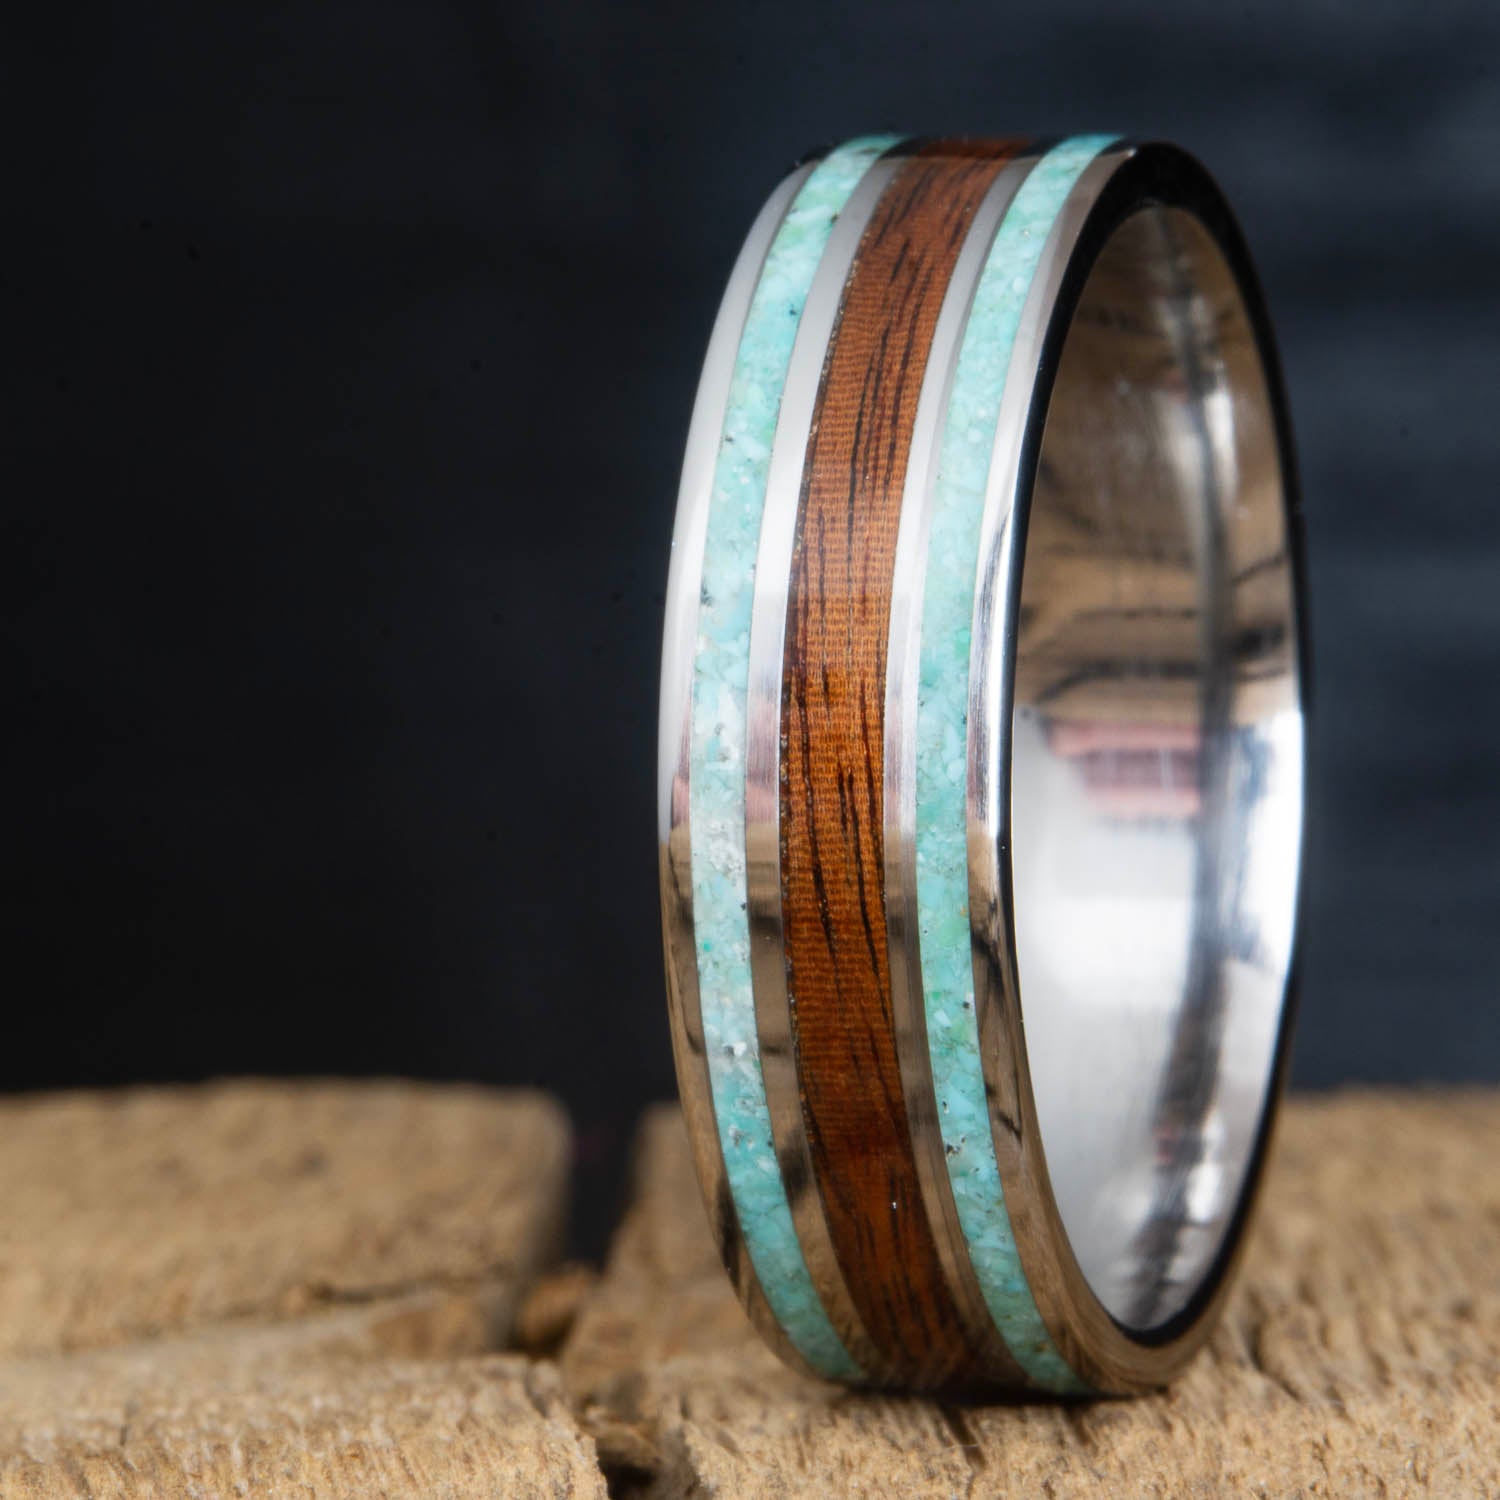 Rosewood and turquoise stone ring